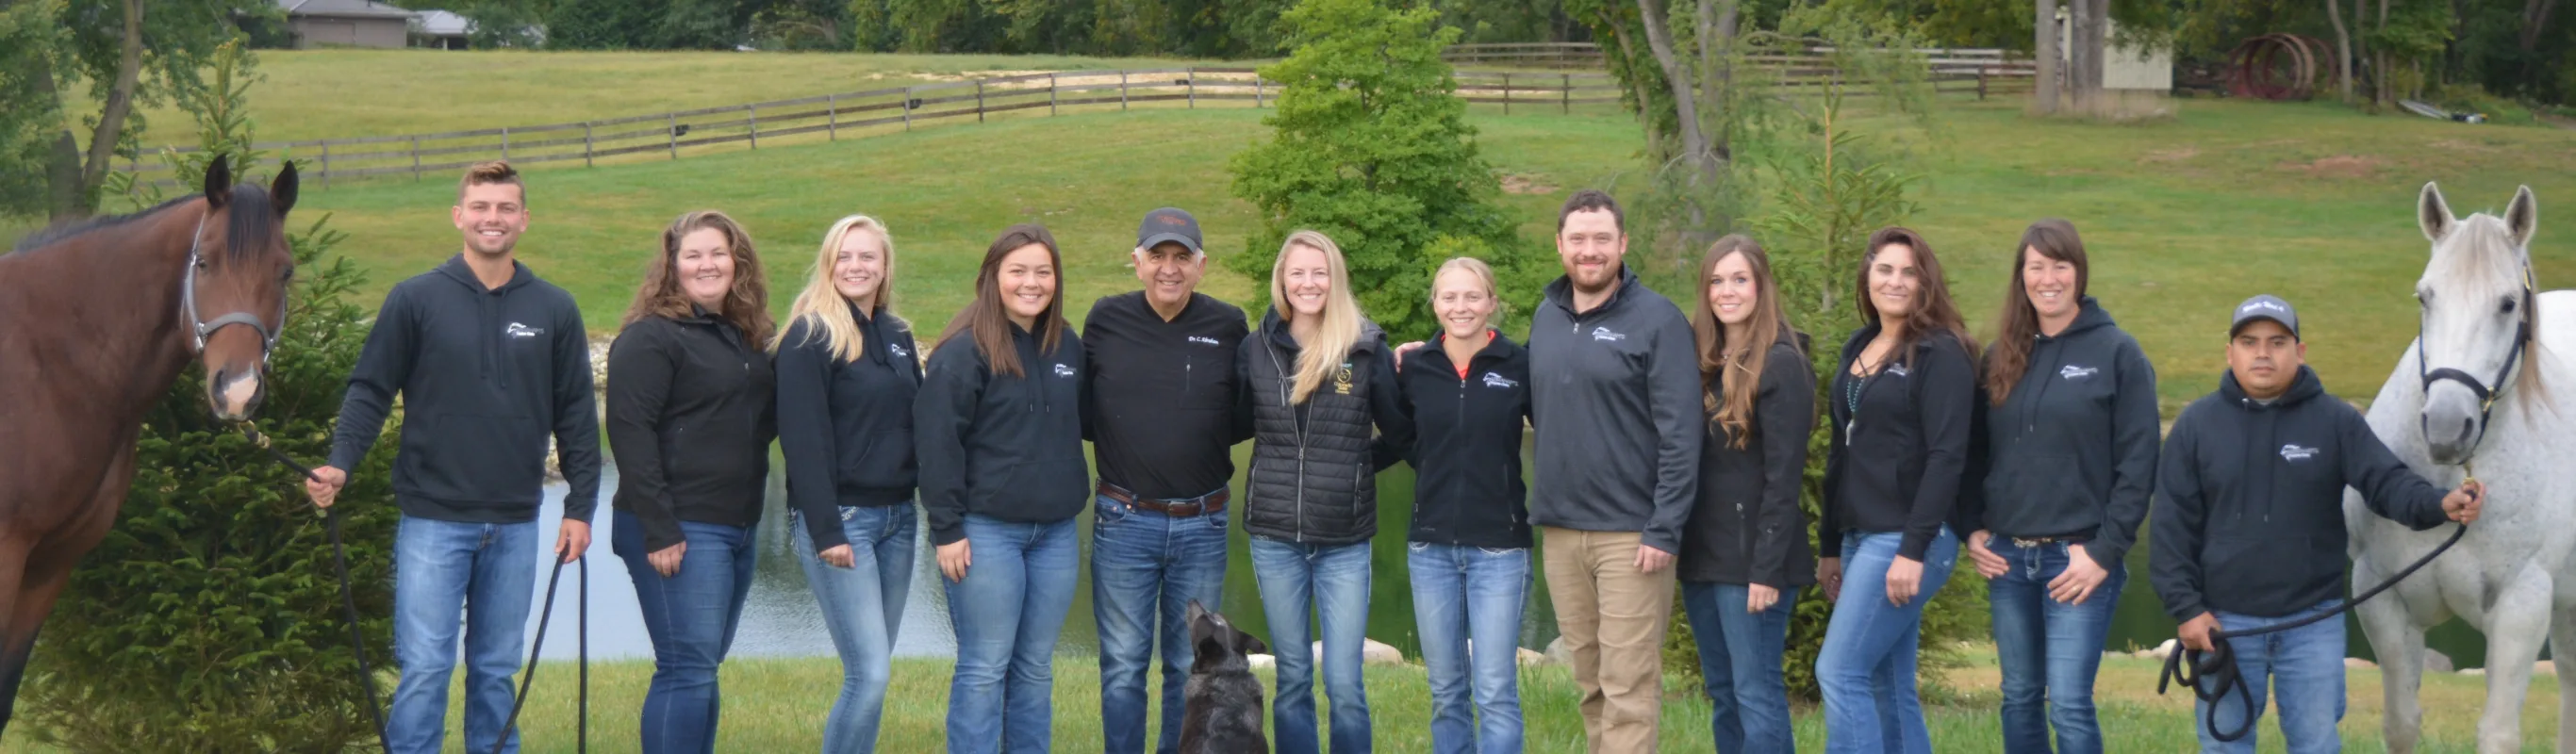 Team photo of abraham's equine clinic